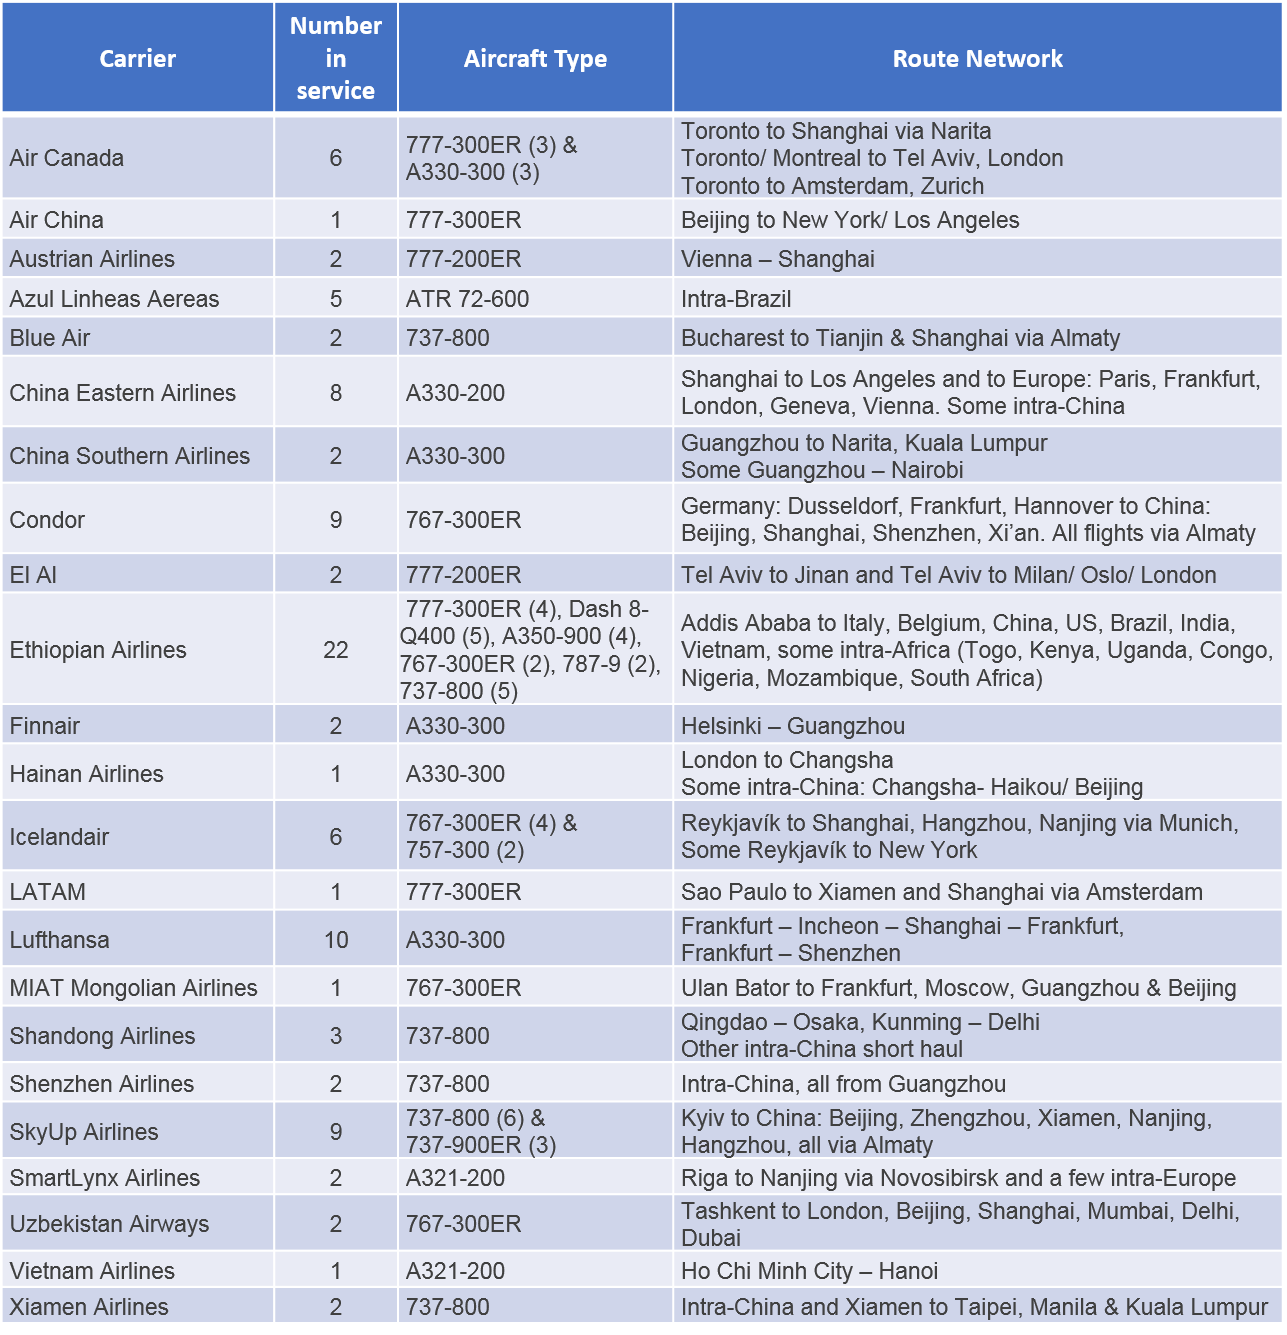 Table 1 - Overview of Seat-less Aircraft Operations